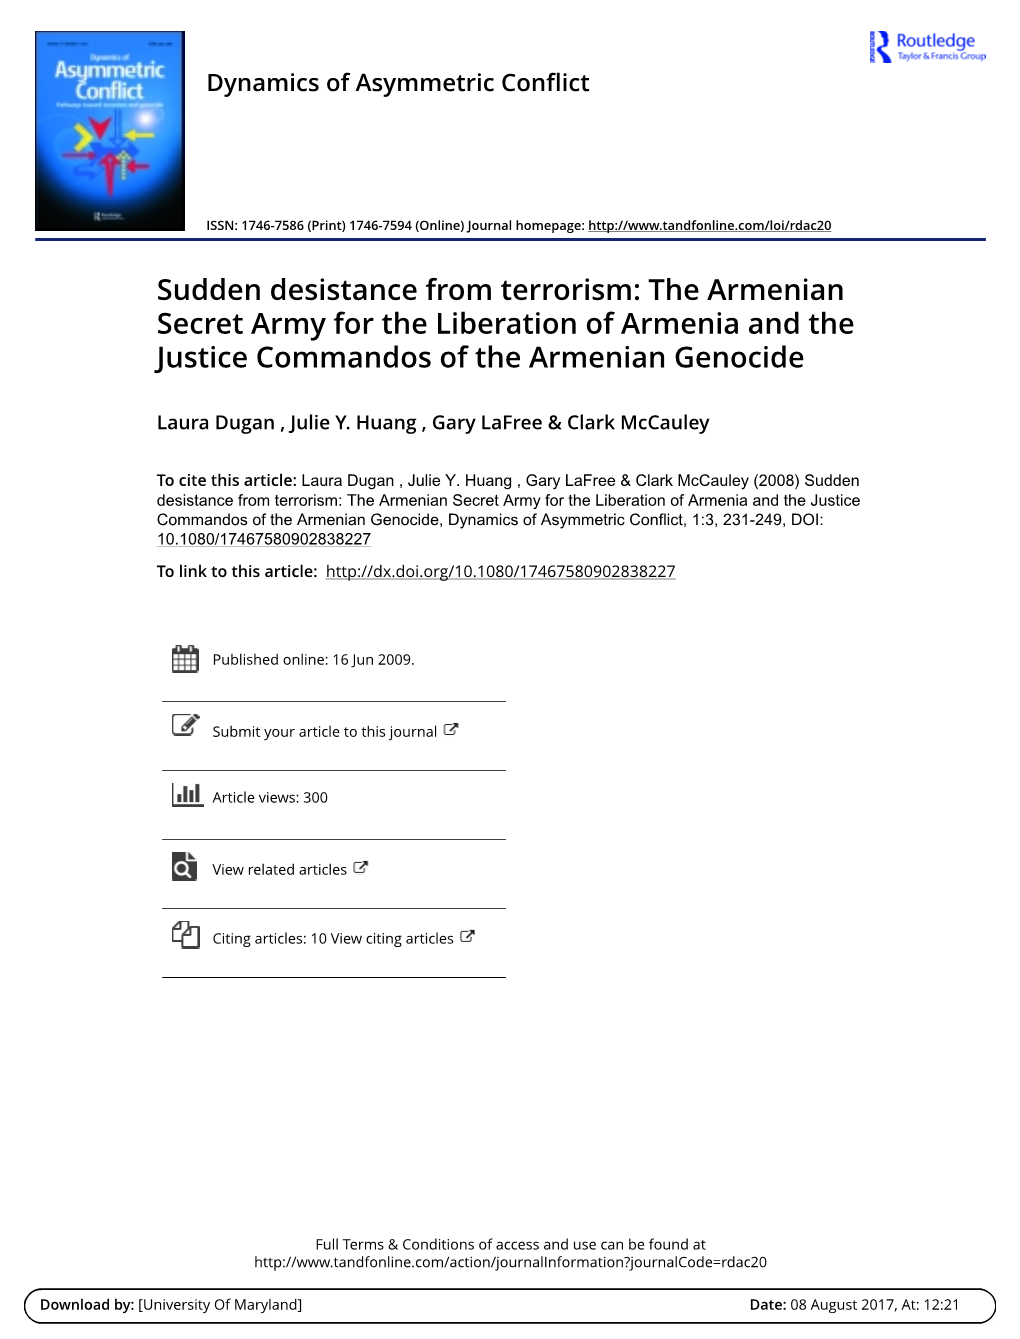 Sudden Desistance from Terrorism: the Armenian Secret Army for the Liberation of Armenia and the Justice Commandos of the Armenian Genocide